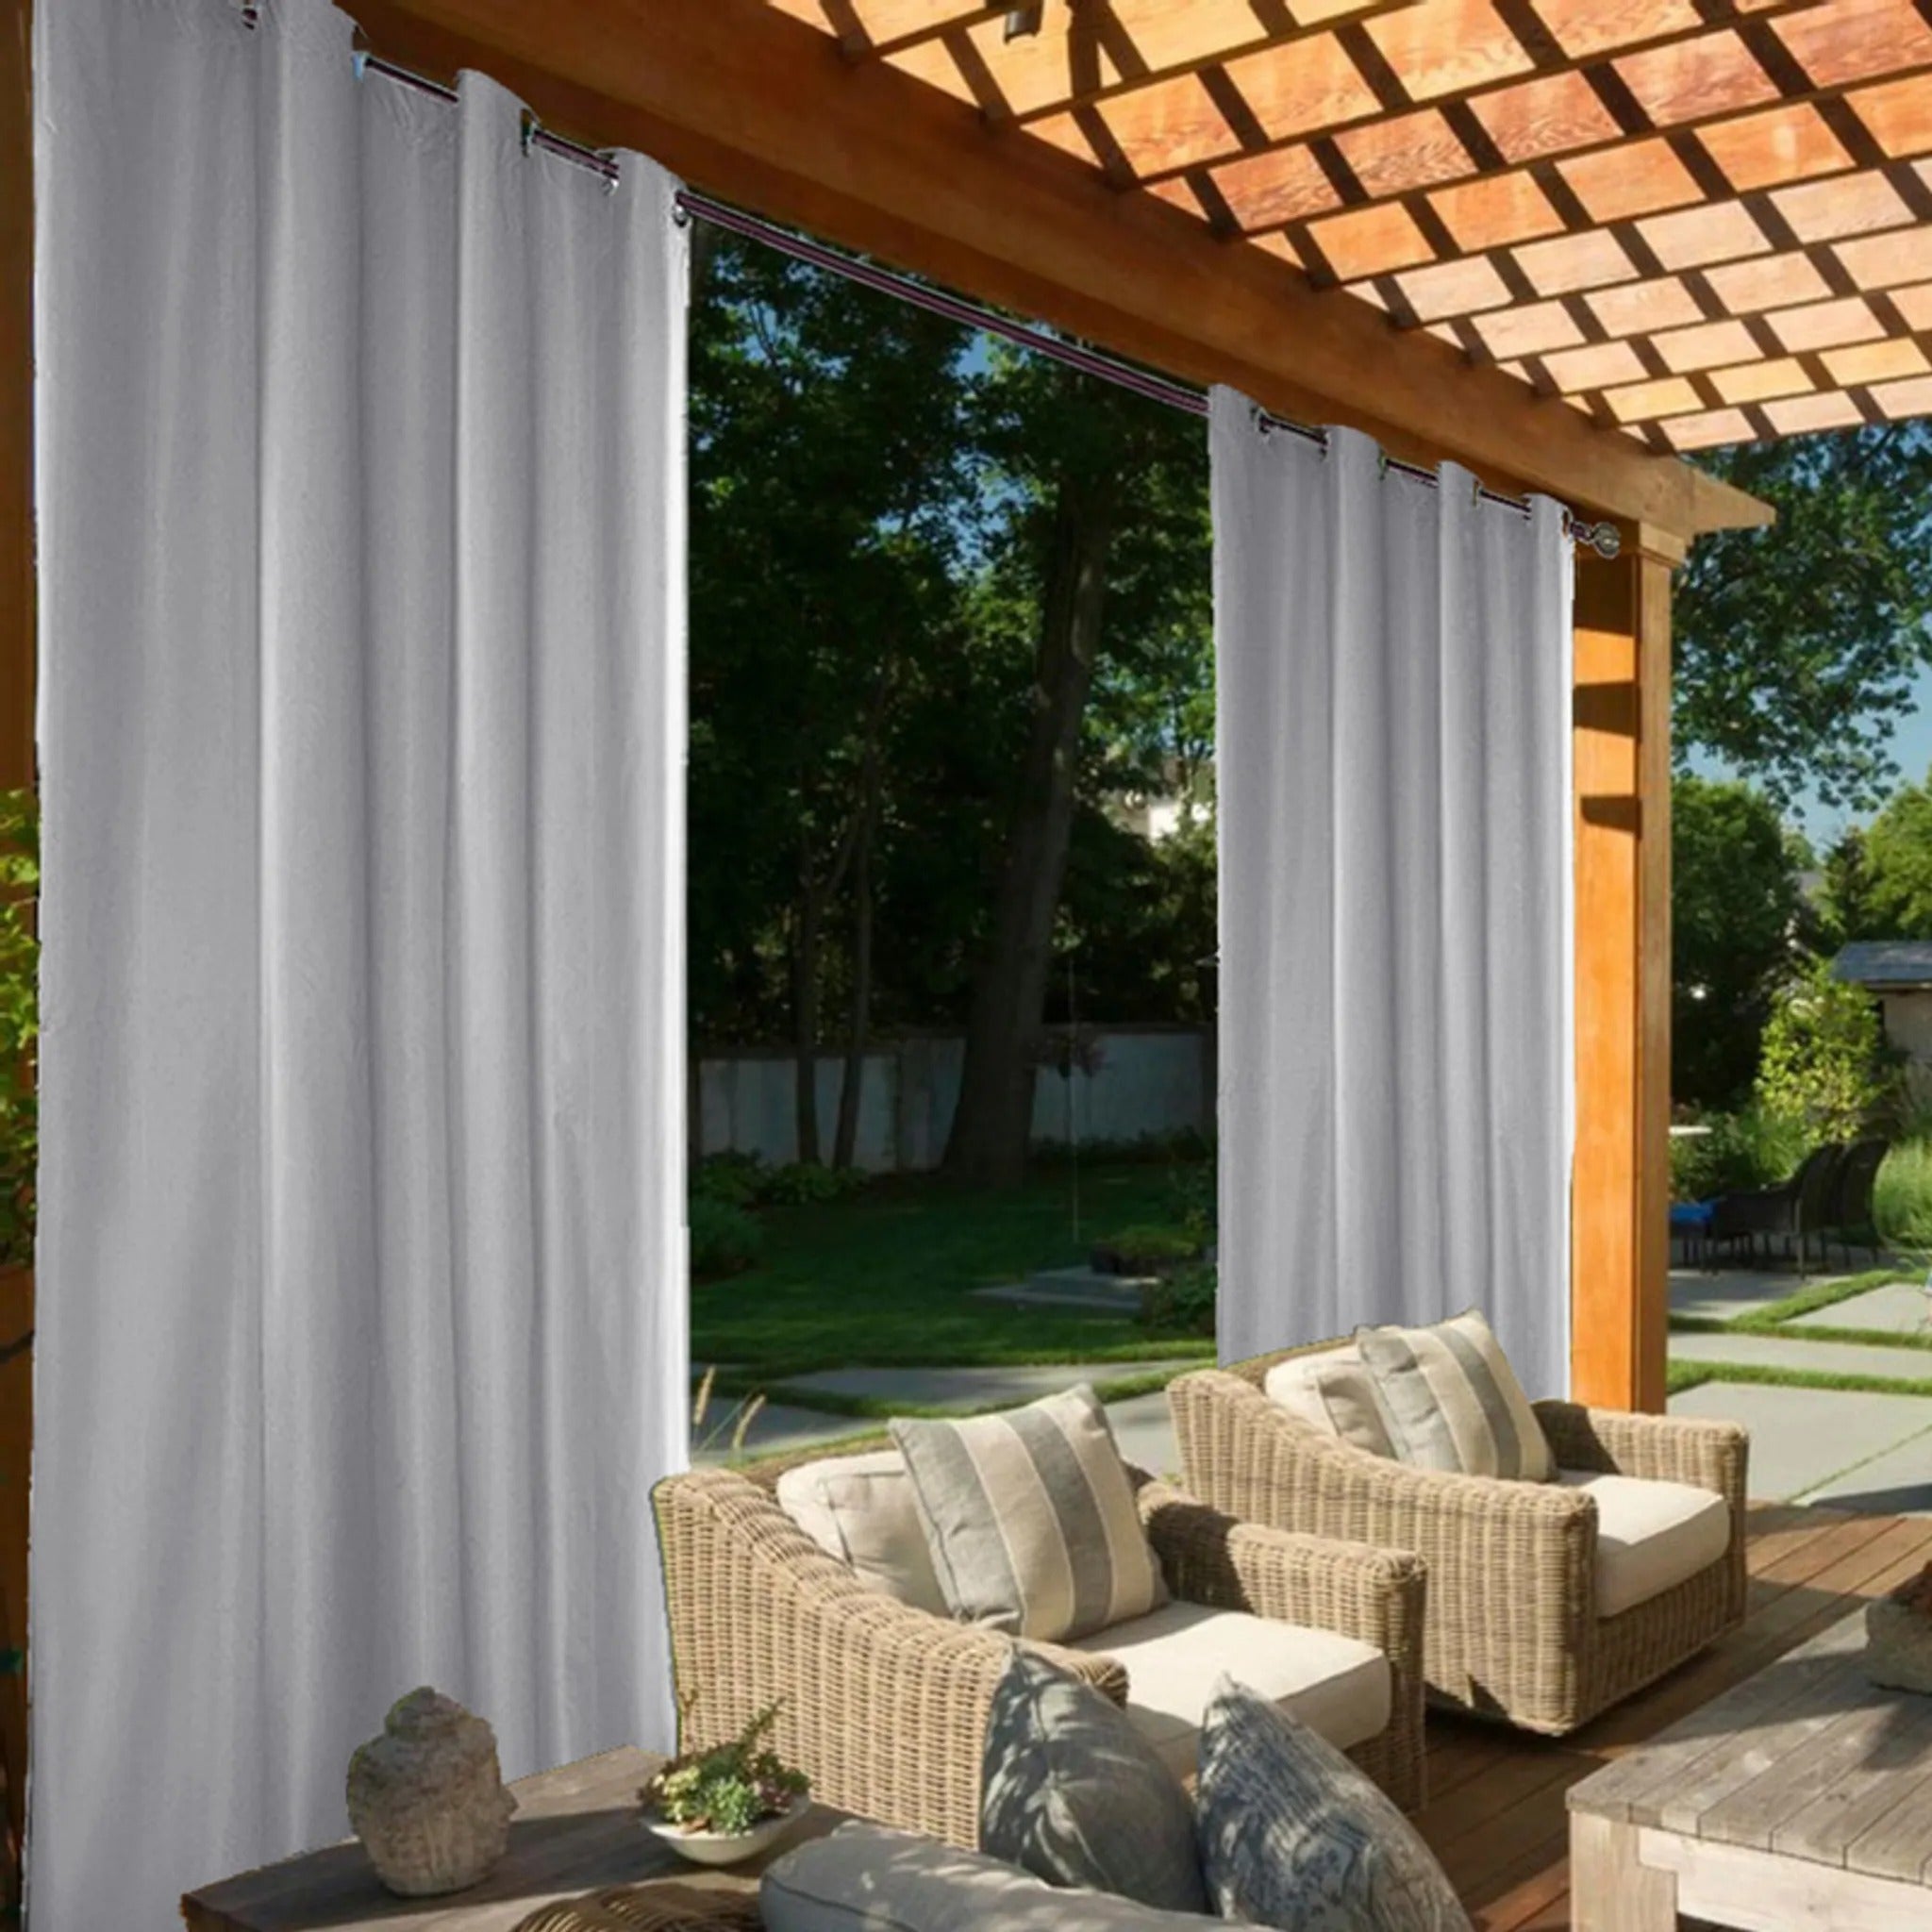 Waterproof Outdoor Curtains for Patio Garden Blackout Curtains｜54 x 84/96/108 Inch｜